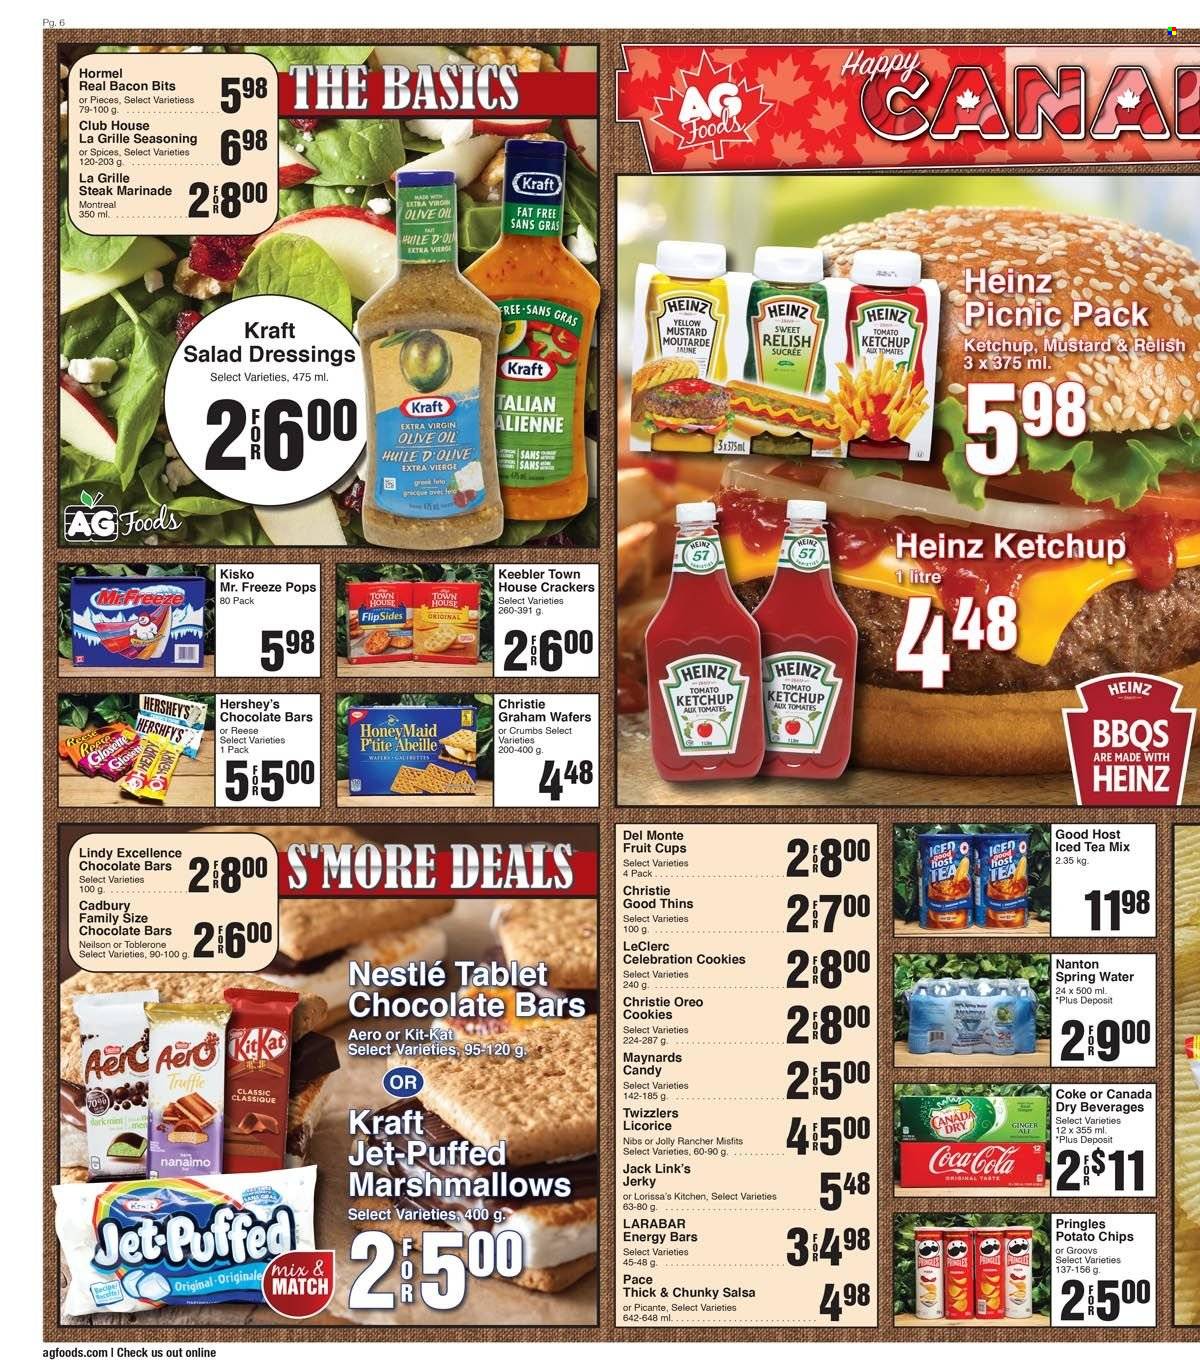 thumbnail - AG Foods Flyer - June 26, 2022 - July 02, 2022 - Sales products - fruit cup, Kraft®, Hormel, jerky, bacon bits, Hershey's, cookies, marshmallows, wafers, truffles, Celebration, crackers, Toblerone, Cadbury, Keebler, chocolate bar, potato chips, Pringles, chips, Thins, Jack Link's, energy bar, spice, mustard, salad dressing, salsa, marinade, extra virgin olive oil, olive oil, oil, Canada Dry, Coca-Cola, ice tea, spring water, Jet, Nestlé, Heinz, ketchup, Oreo, steak. Page 6.